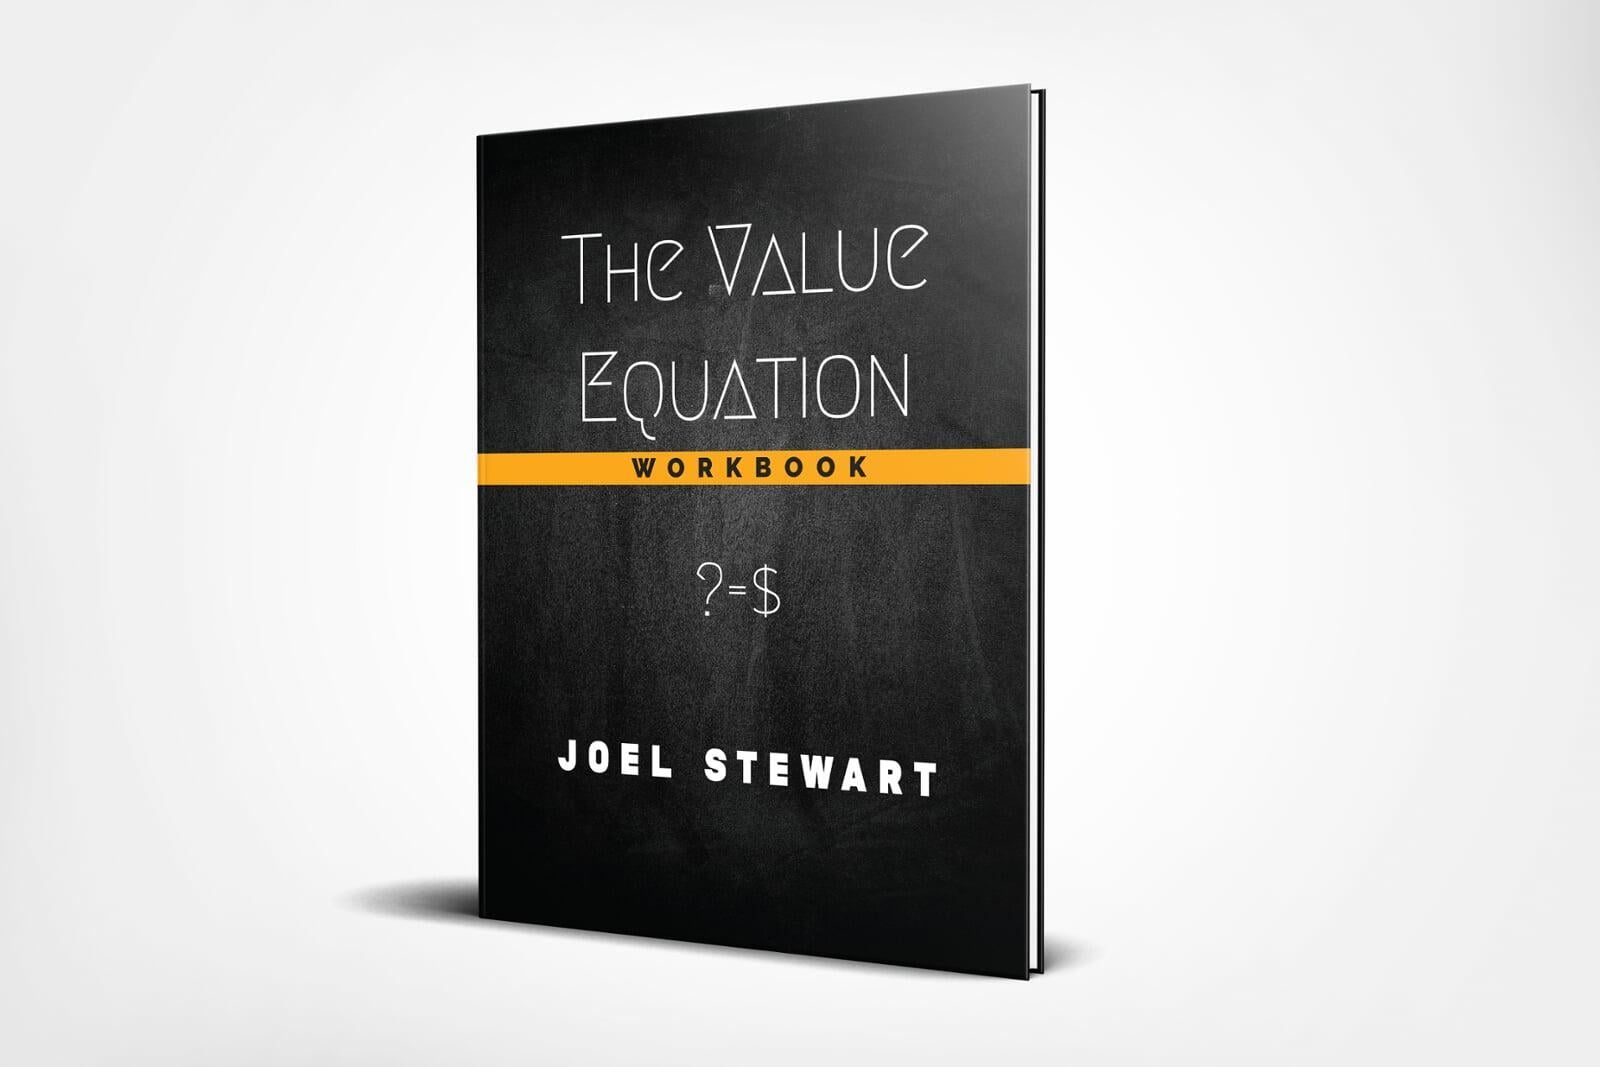 Image of The Value Equation workbook. Links to product listing on Amazon